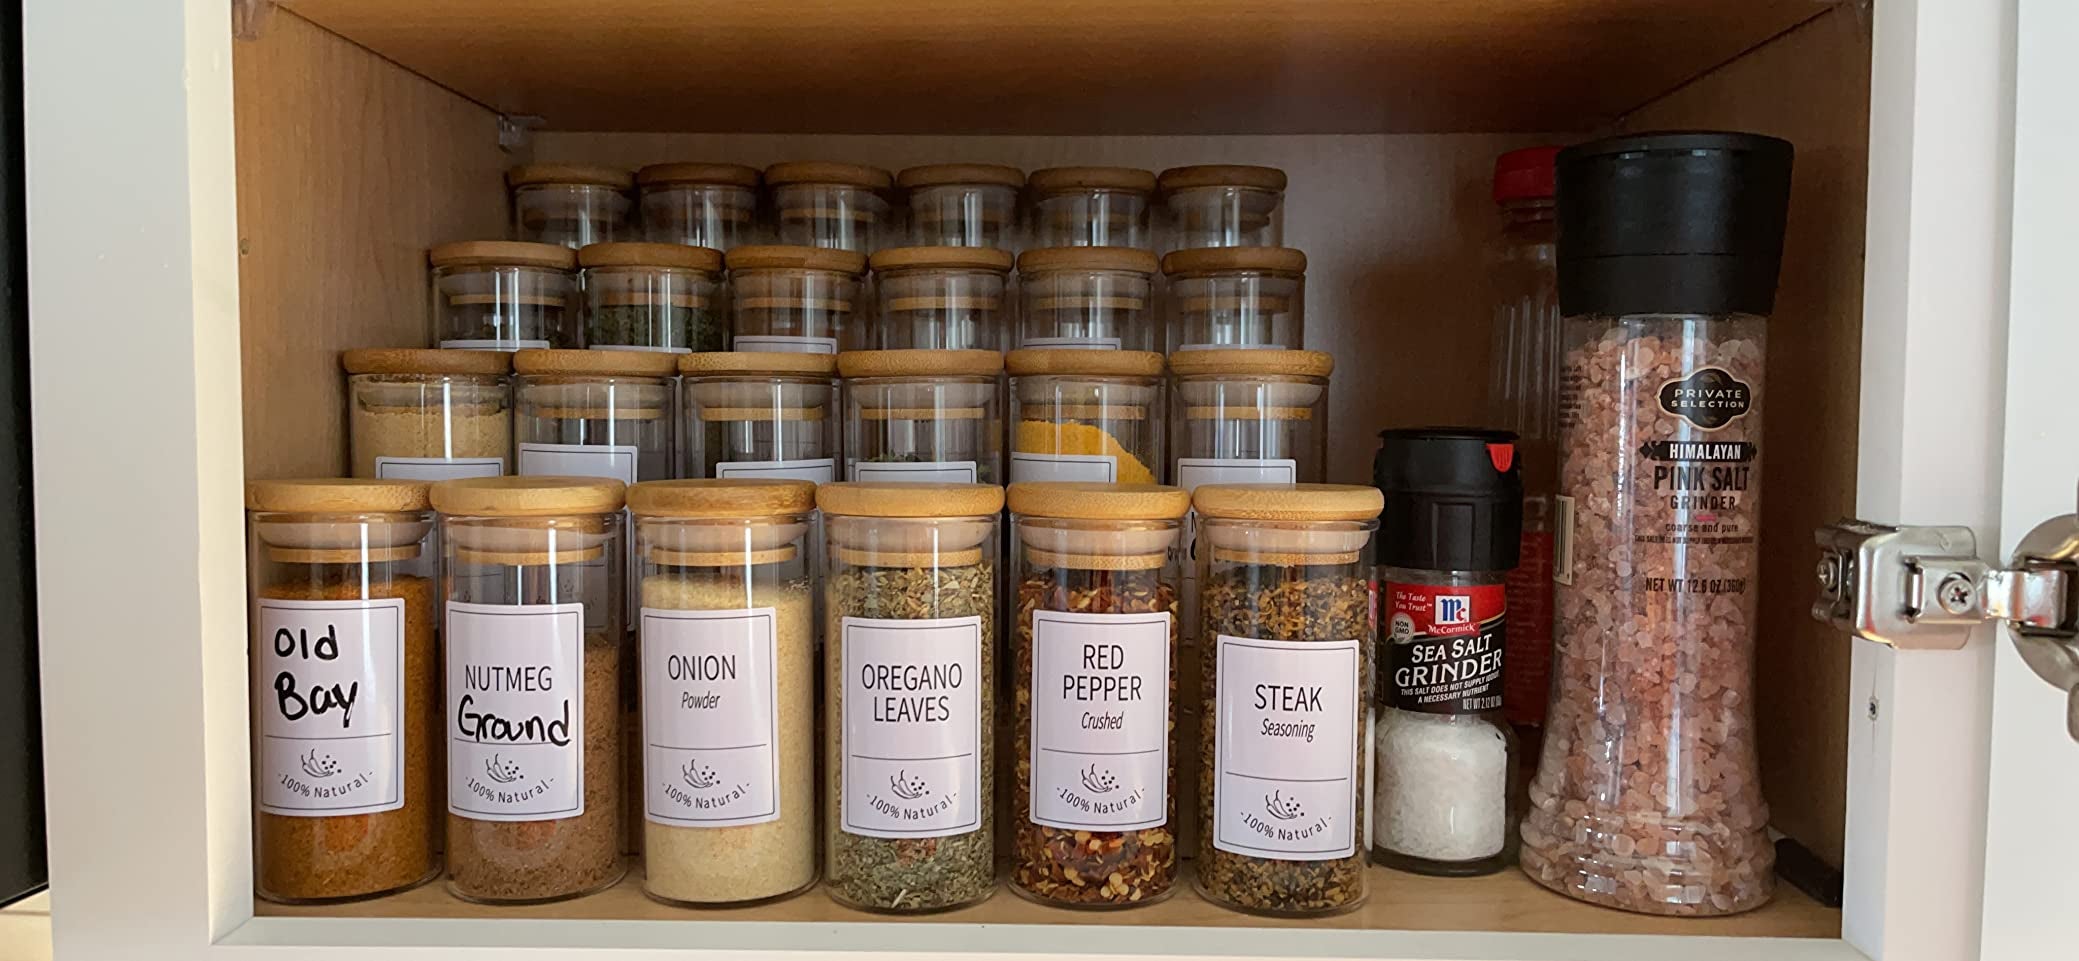 A cabinet filled with various seasonings in glass jars